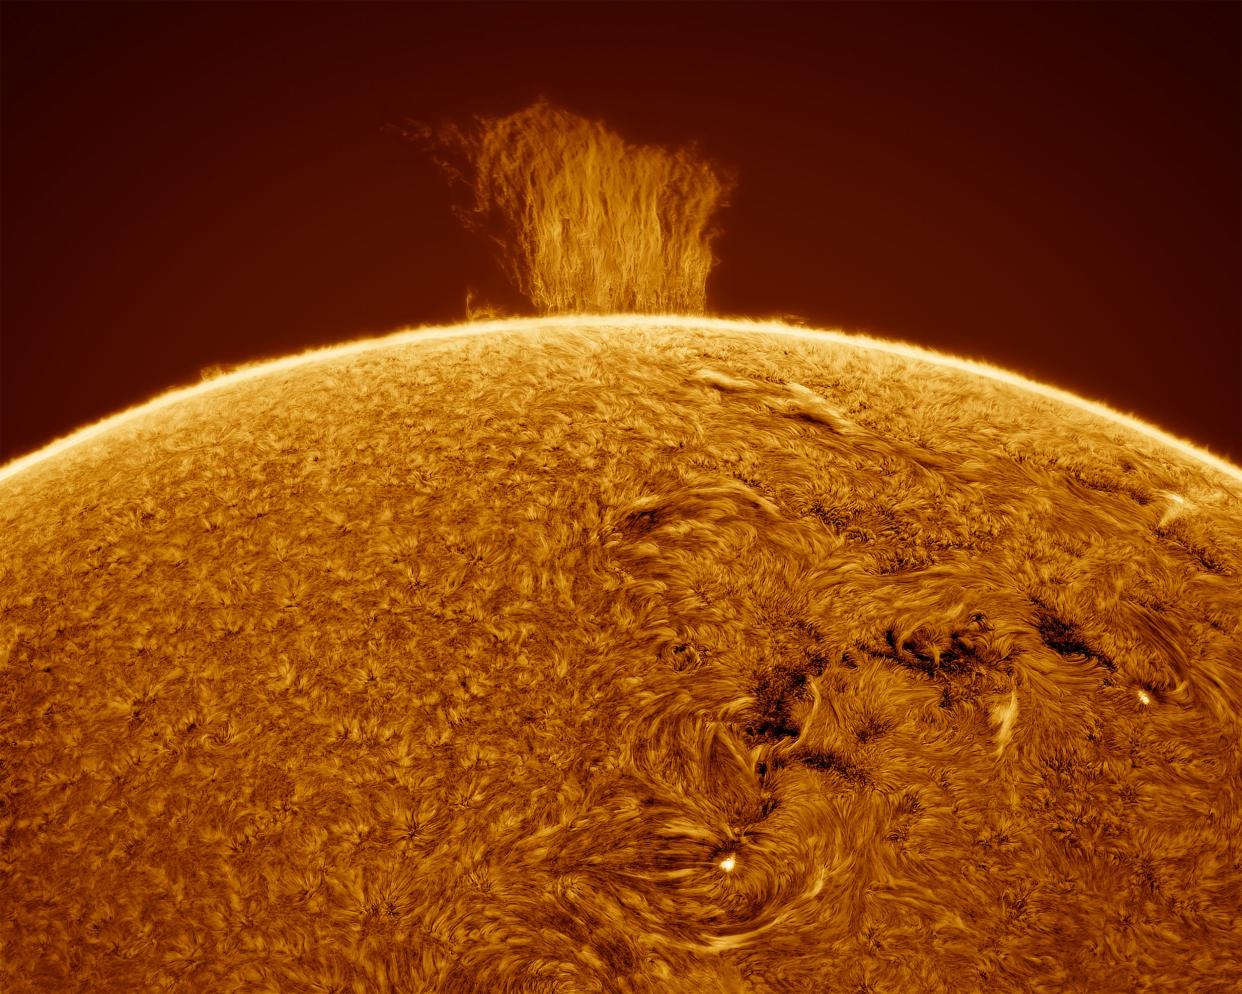 A picture of the sun shows a square prominence sticking out of the sun like a waterfall